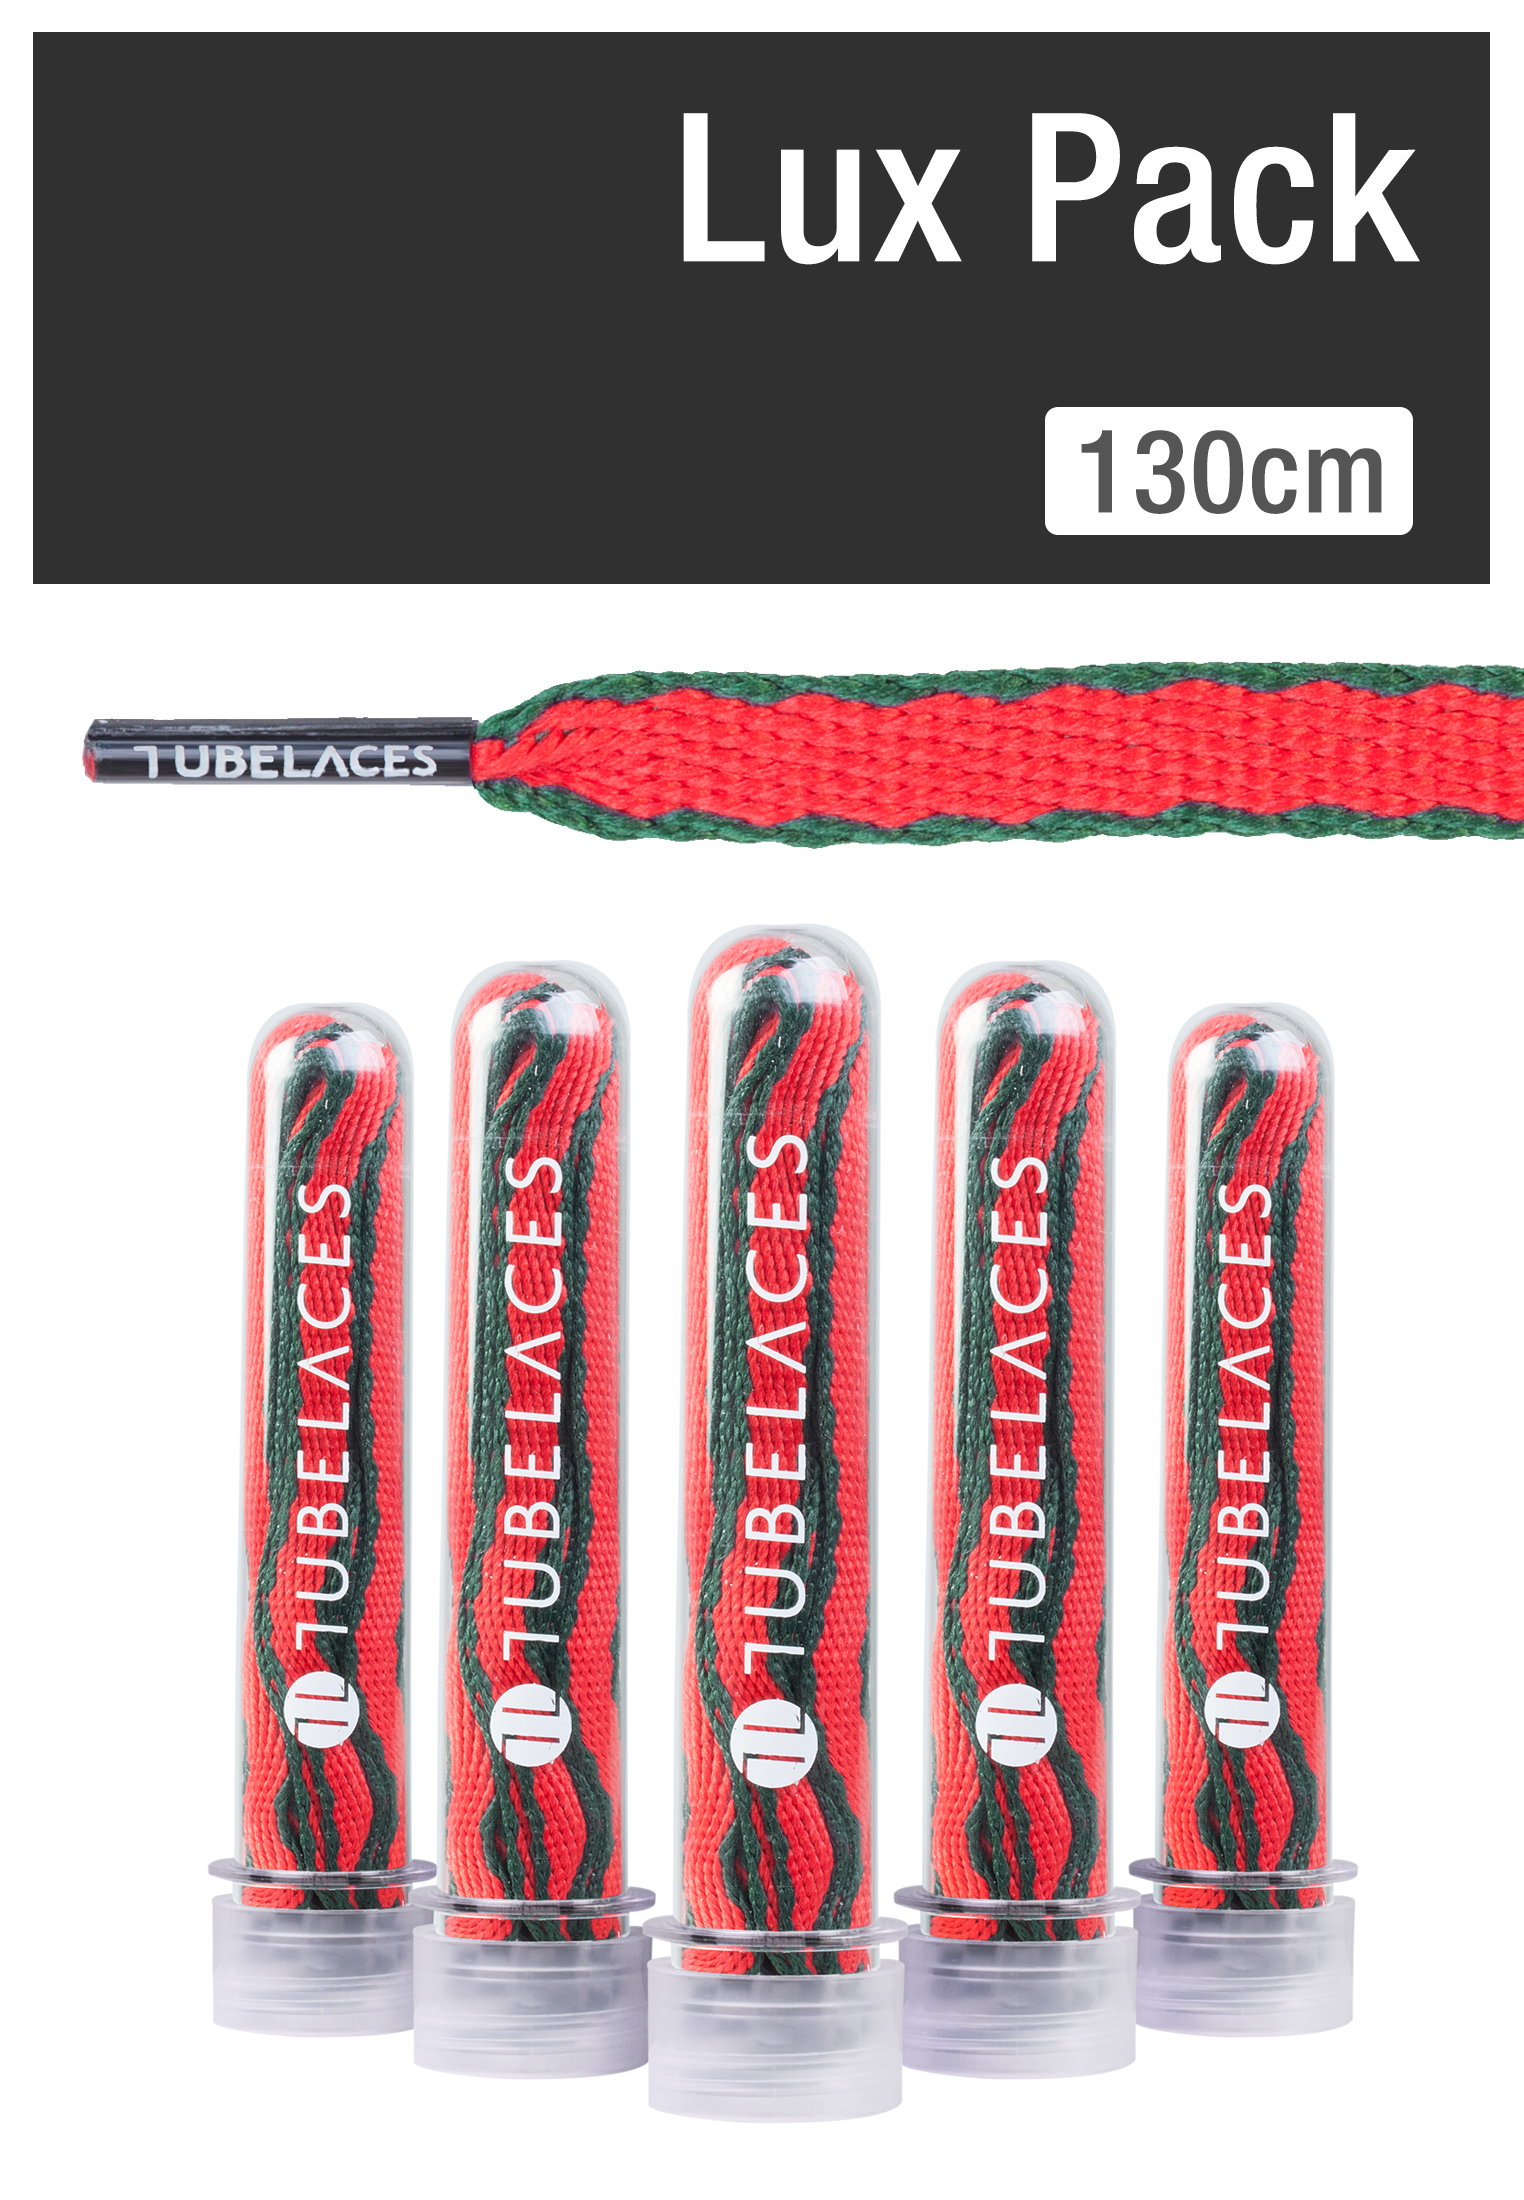 Laces Tubelaces Lux Pack (5er) in Farbe raute/blk